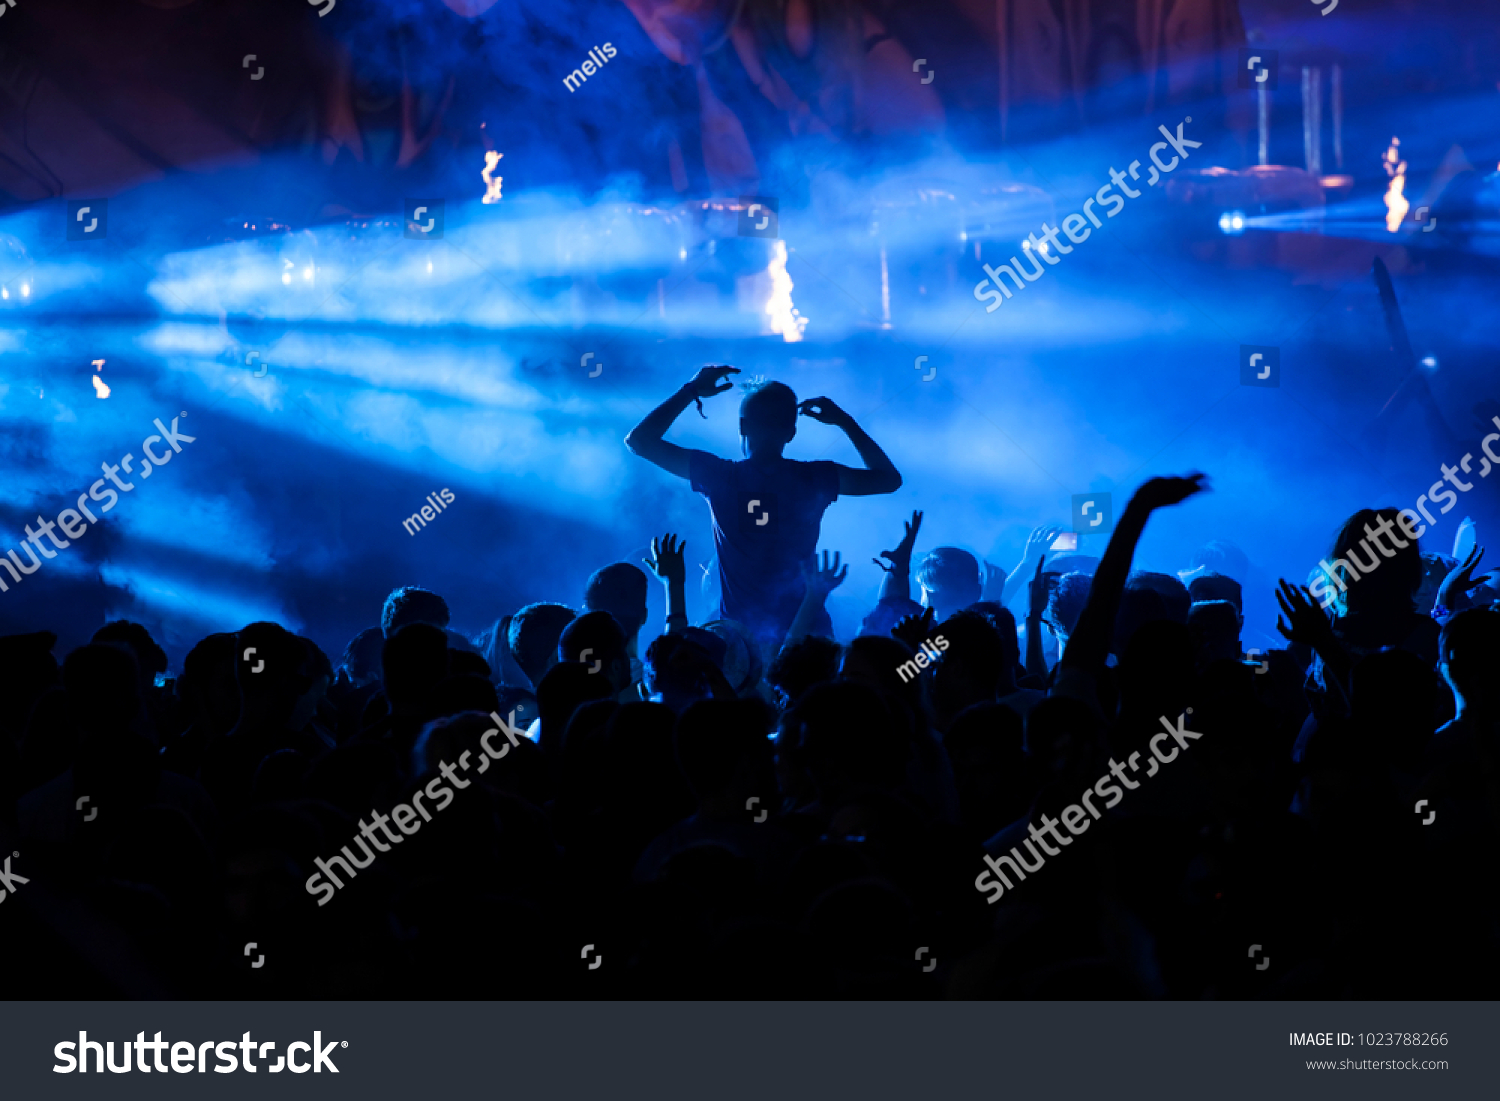 Crowd at concert - Cheering crowd in front of bright colorful stage lights #1023788266